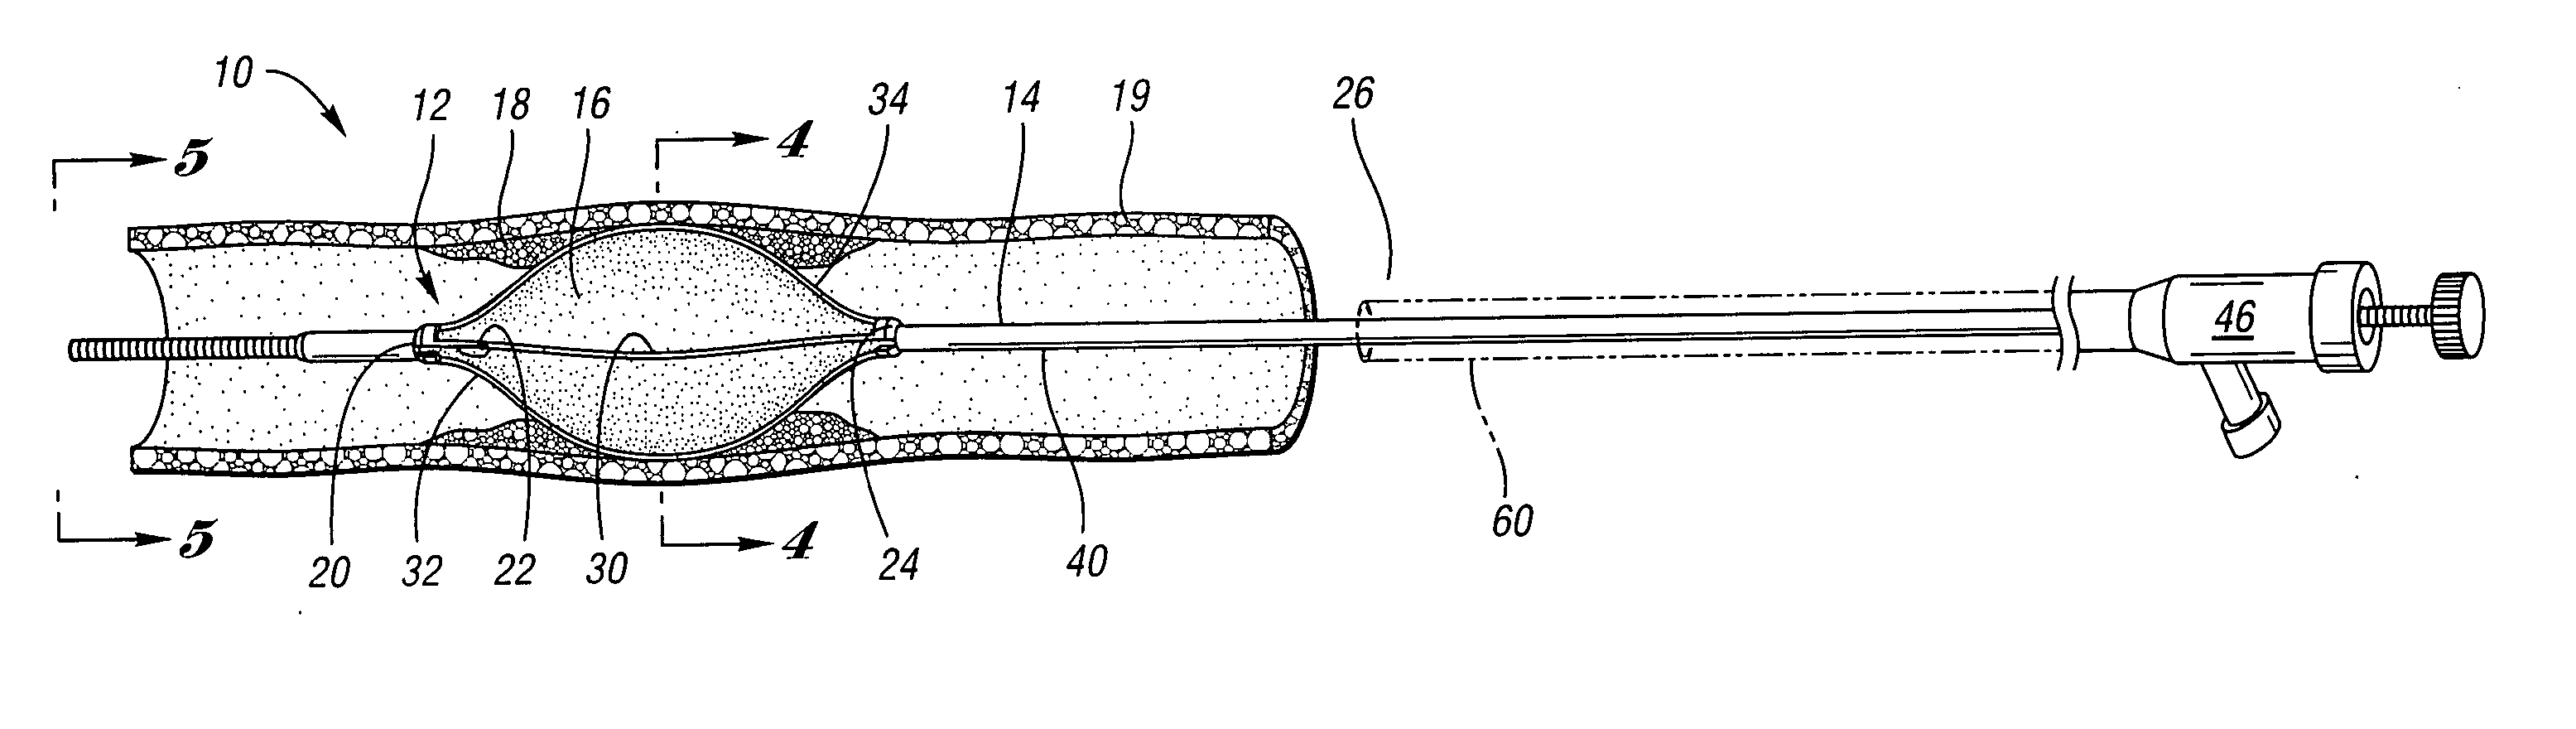 Angioplasty cutting device and method for treating a stenotic lesion in a body vessel